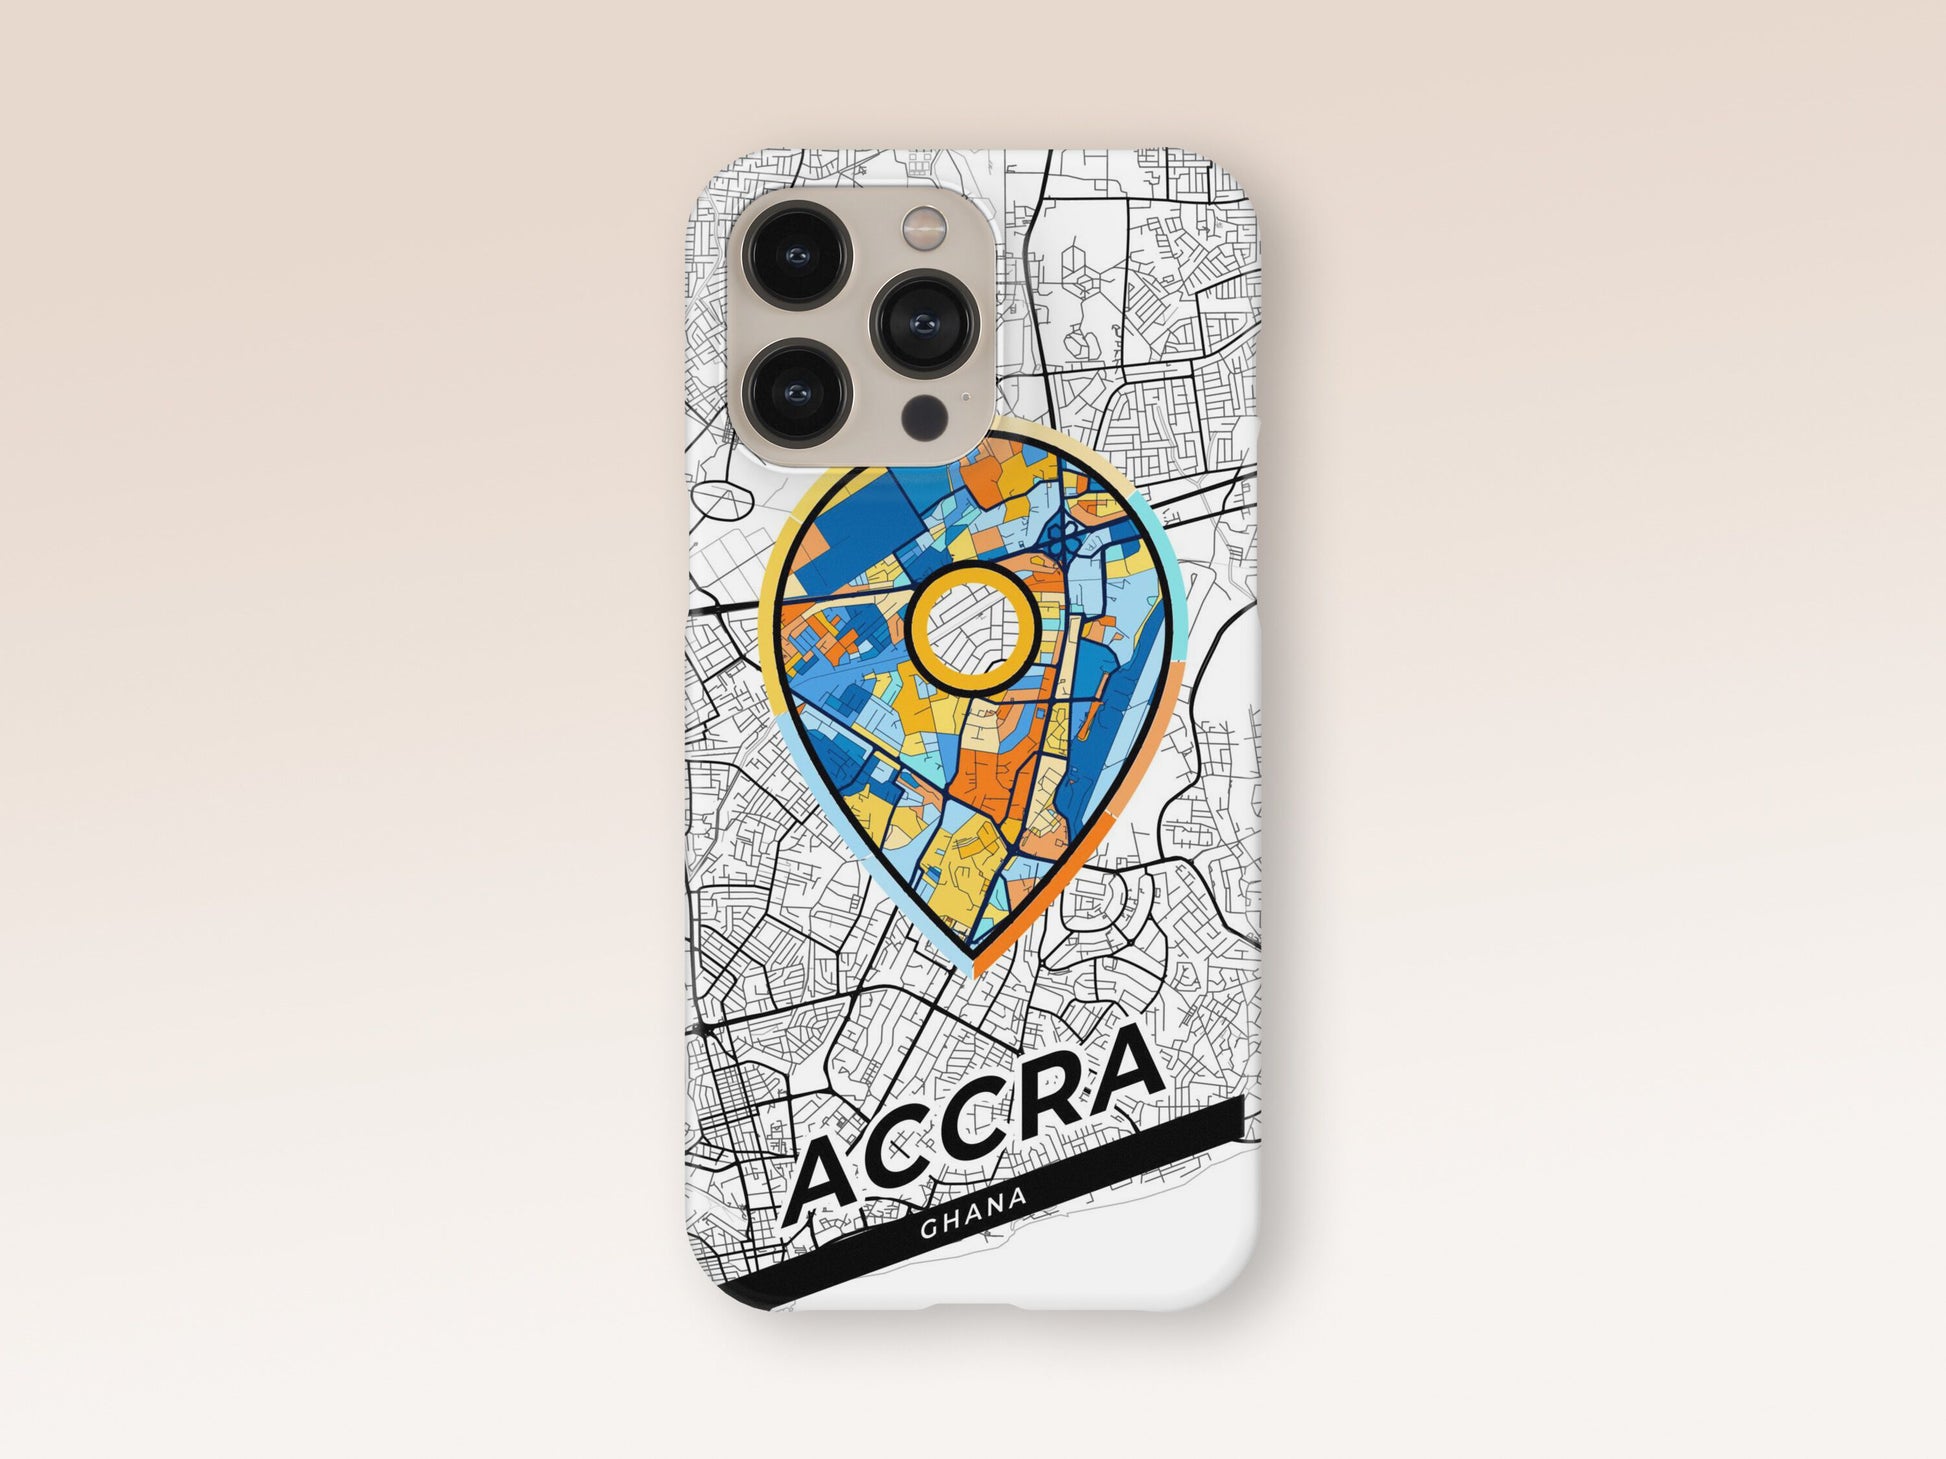 Accra Ghana slim phone case with colorful icon. Birthday, wedding or housewarming gift. Couple match cases. 1